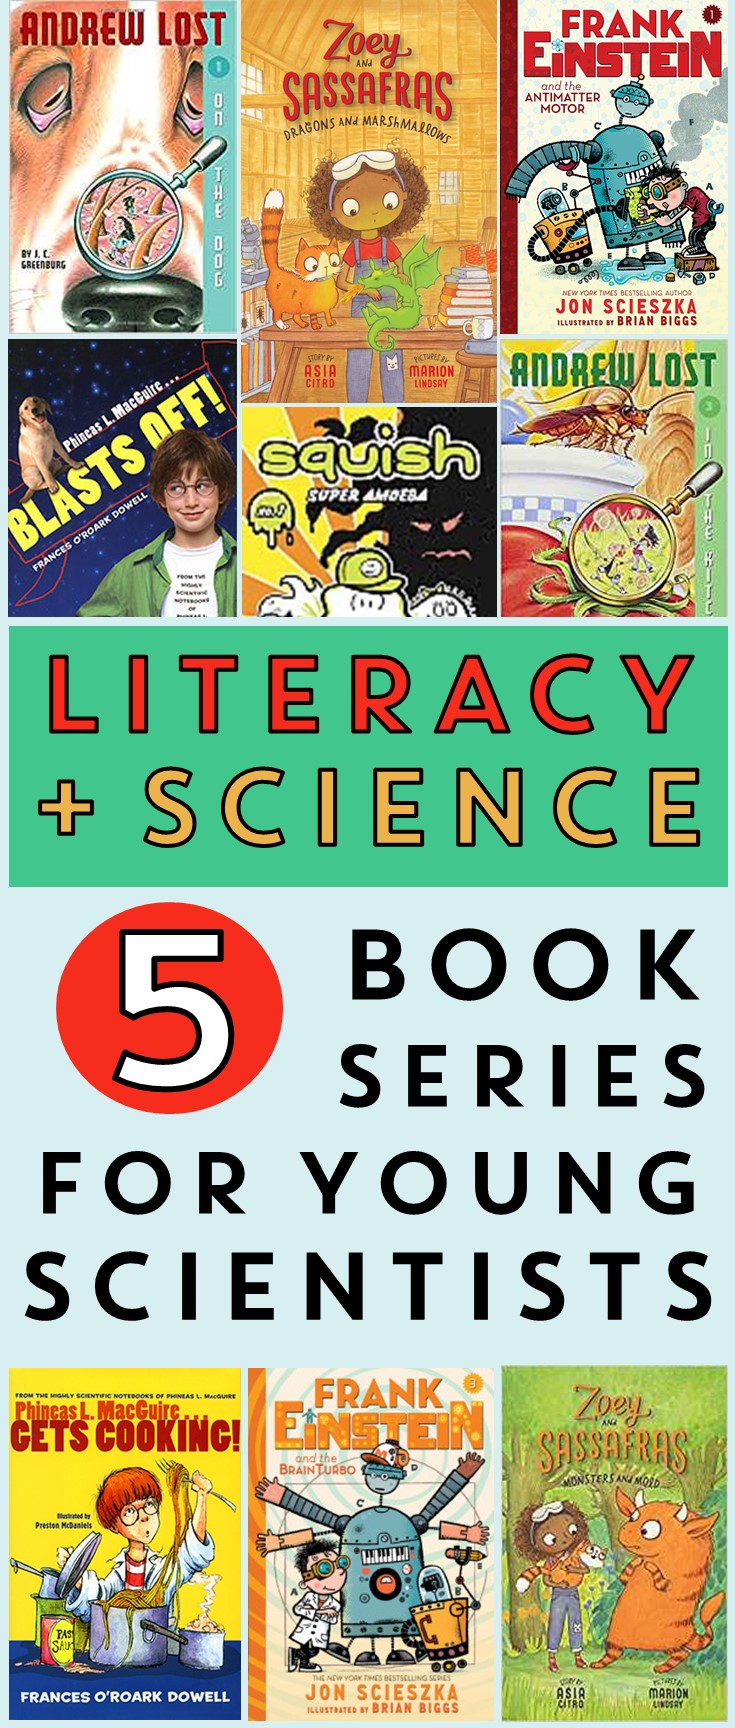 5 great chapter book series for young scientists + a FREE science and literacy printable!